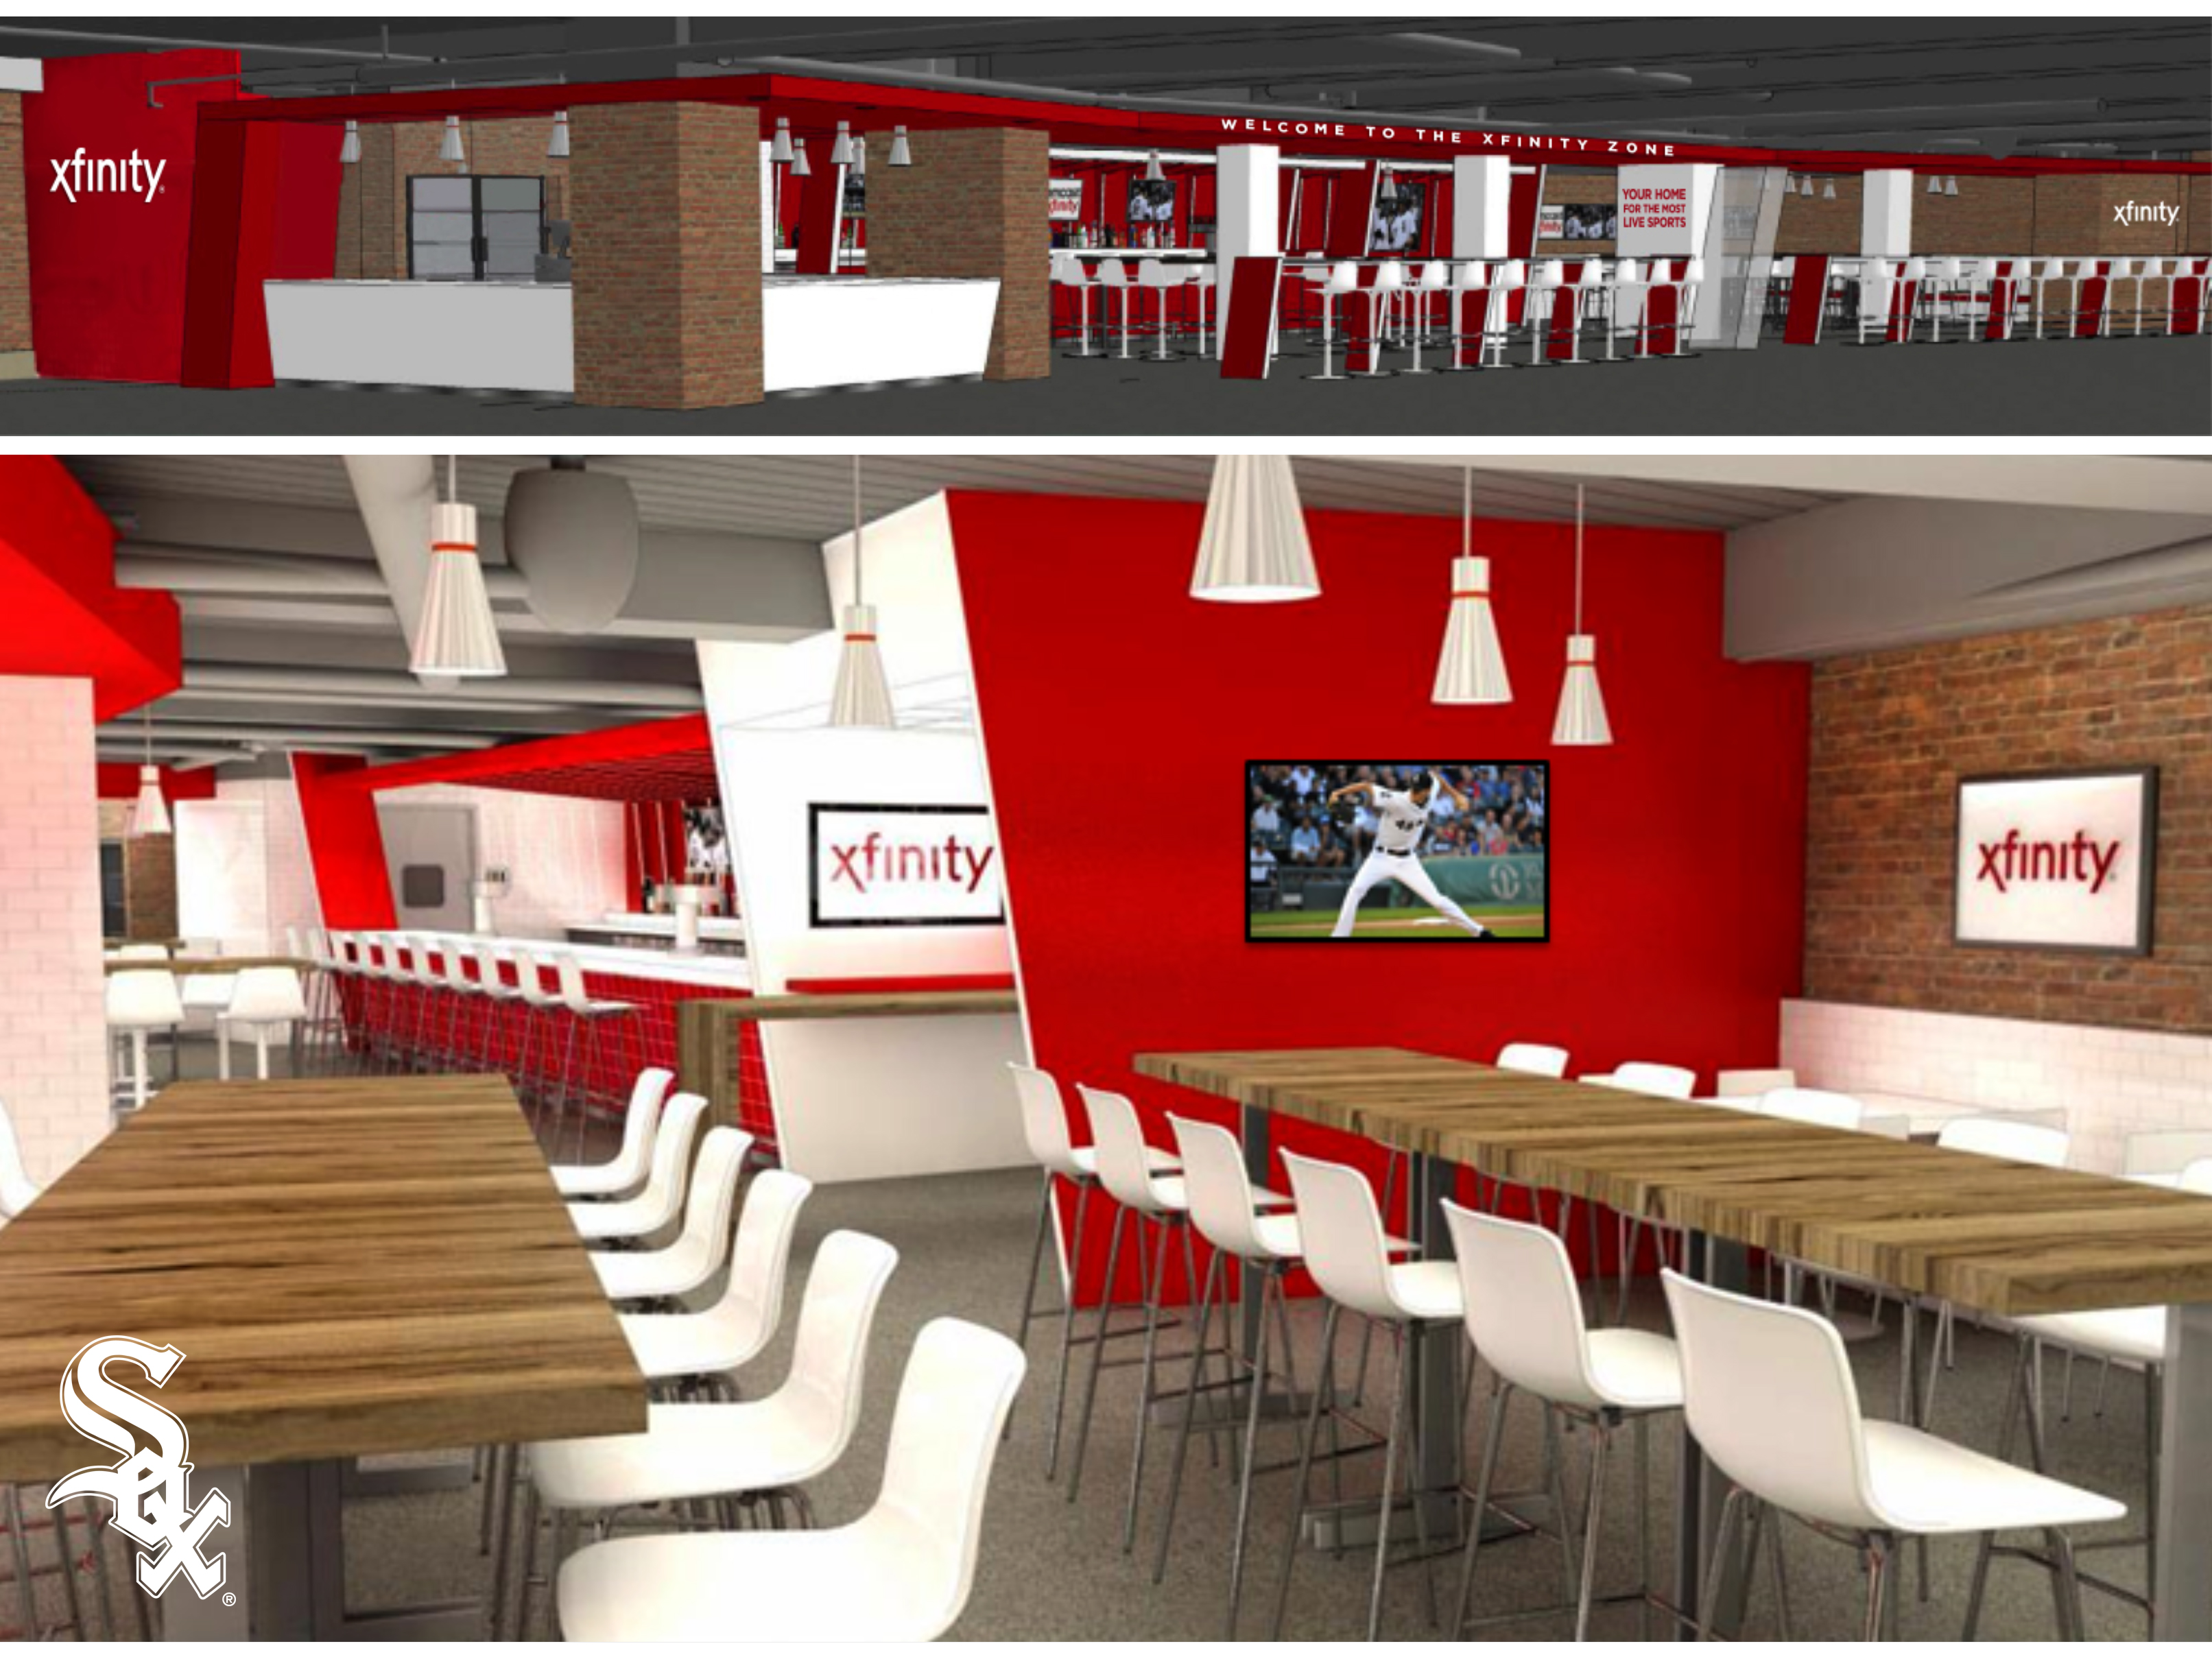 Rendering of the Xfinity Zone at U.S. Cellular Field in Chicago